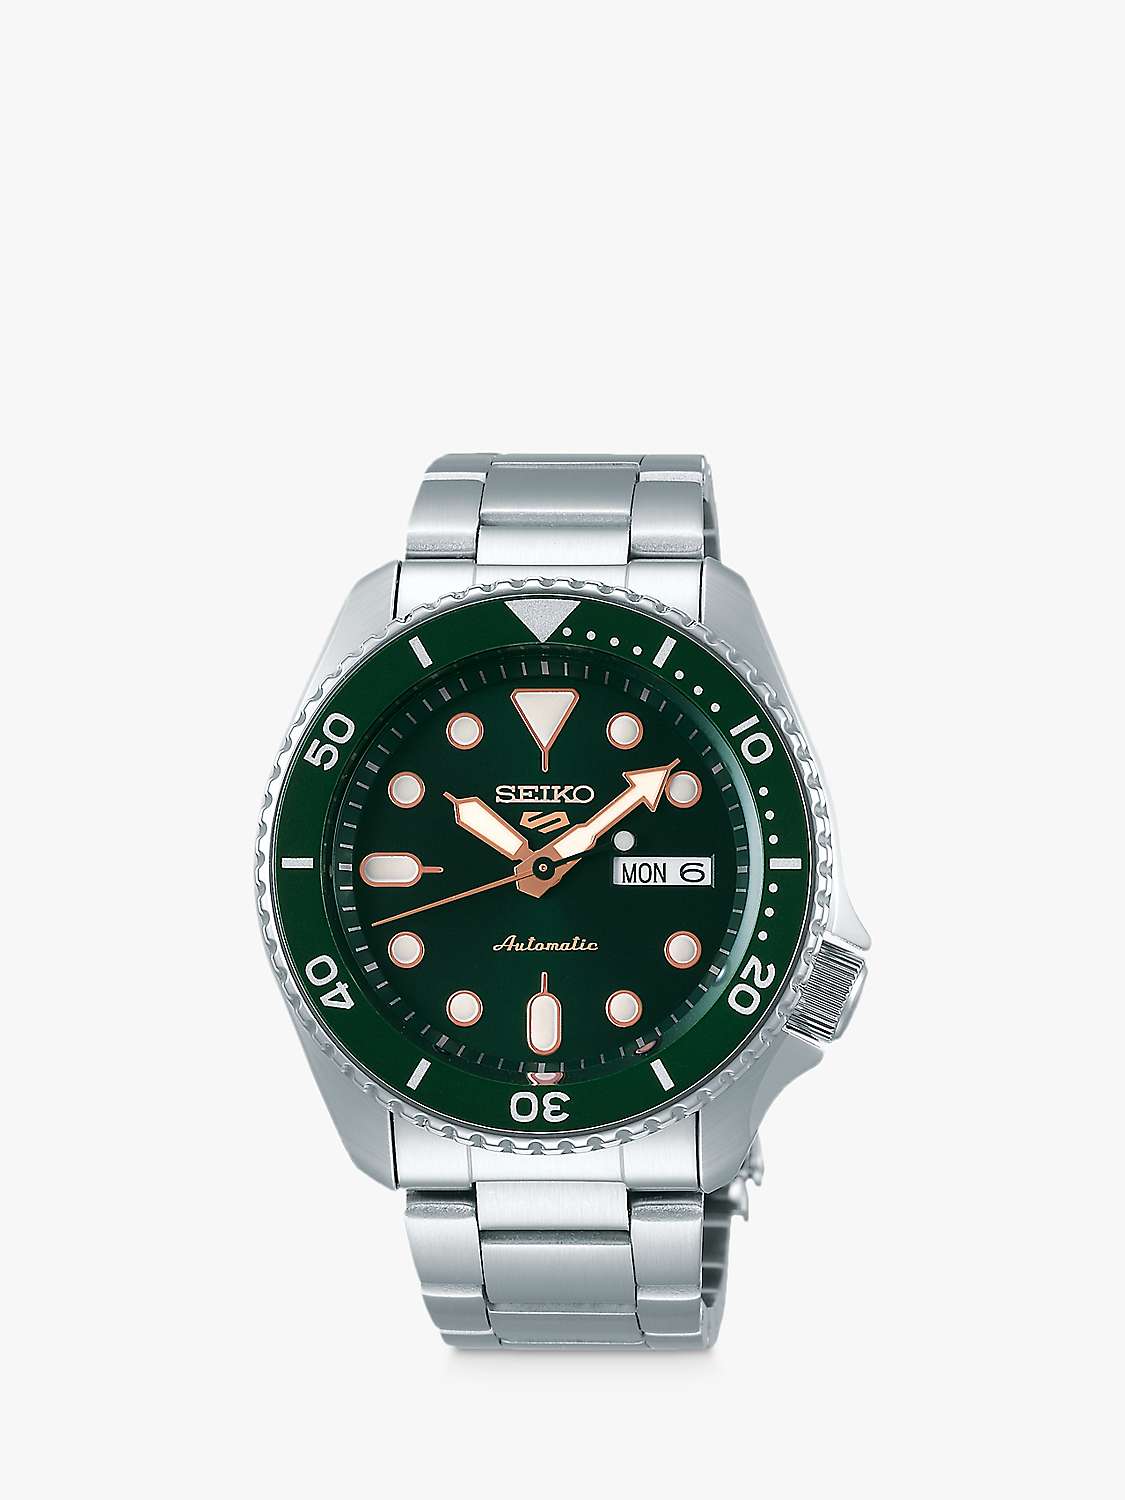 Buy Seiko Men's 5 Sports Automatic Day Date Bracelet Strap Watch Online at johnlewis.com